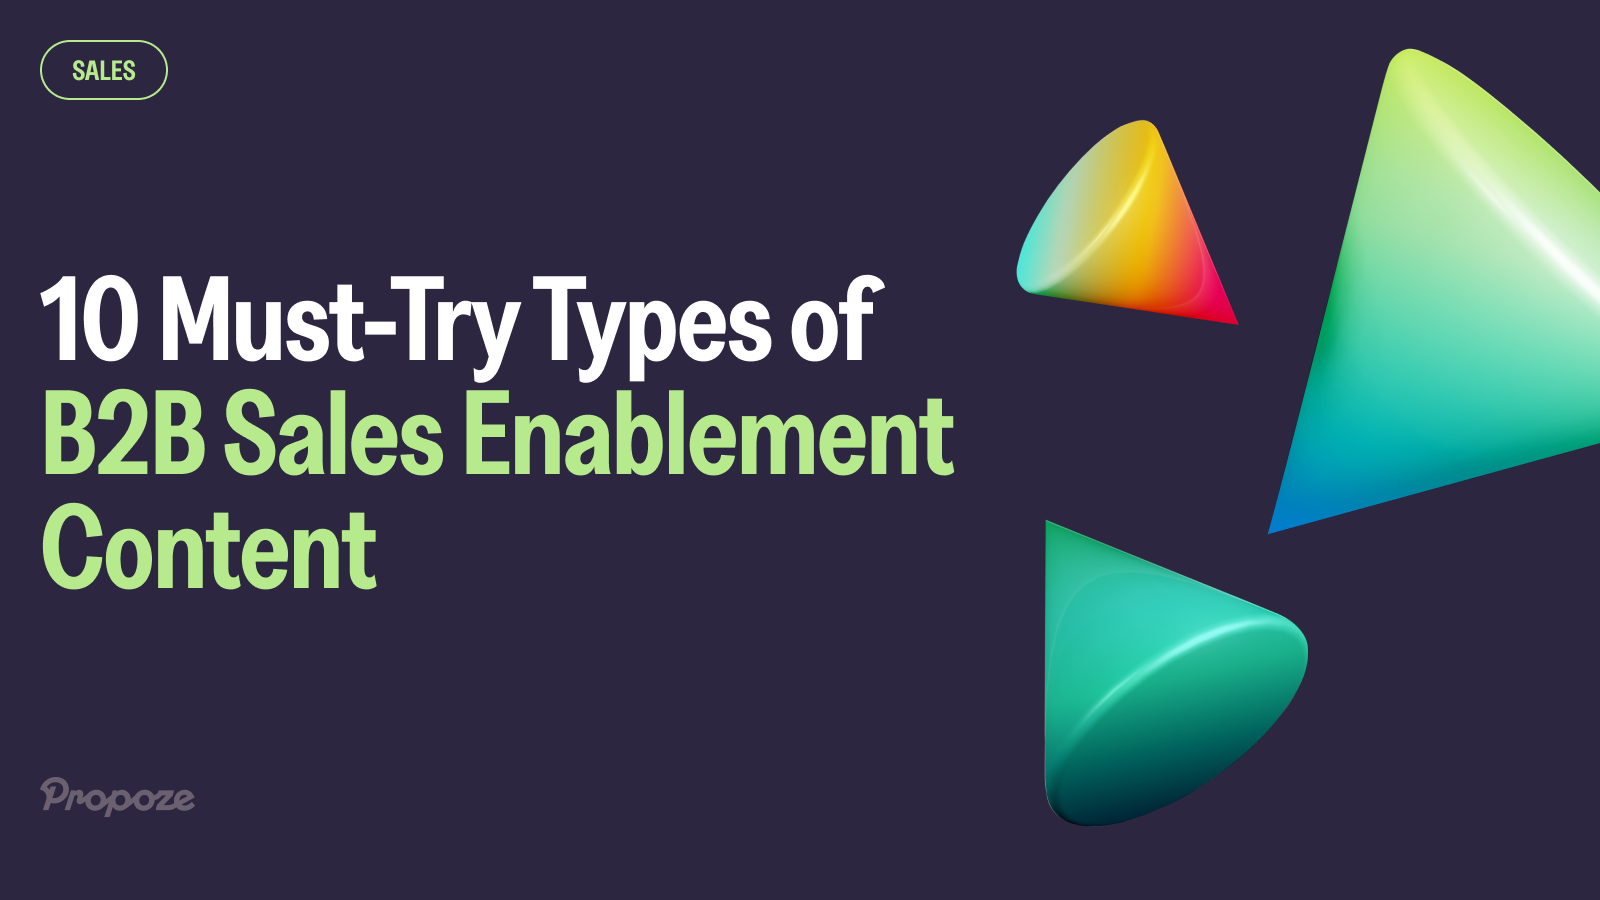 10 Must-Try Types of B2B Sales Enablement Content